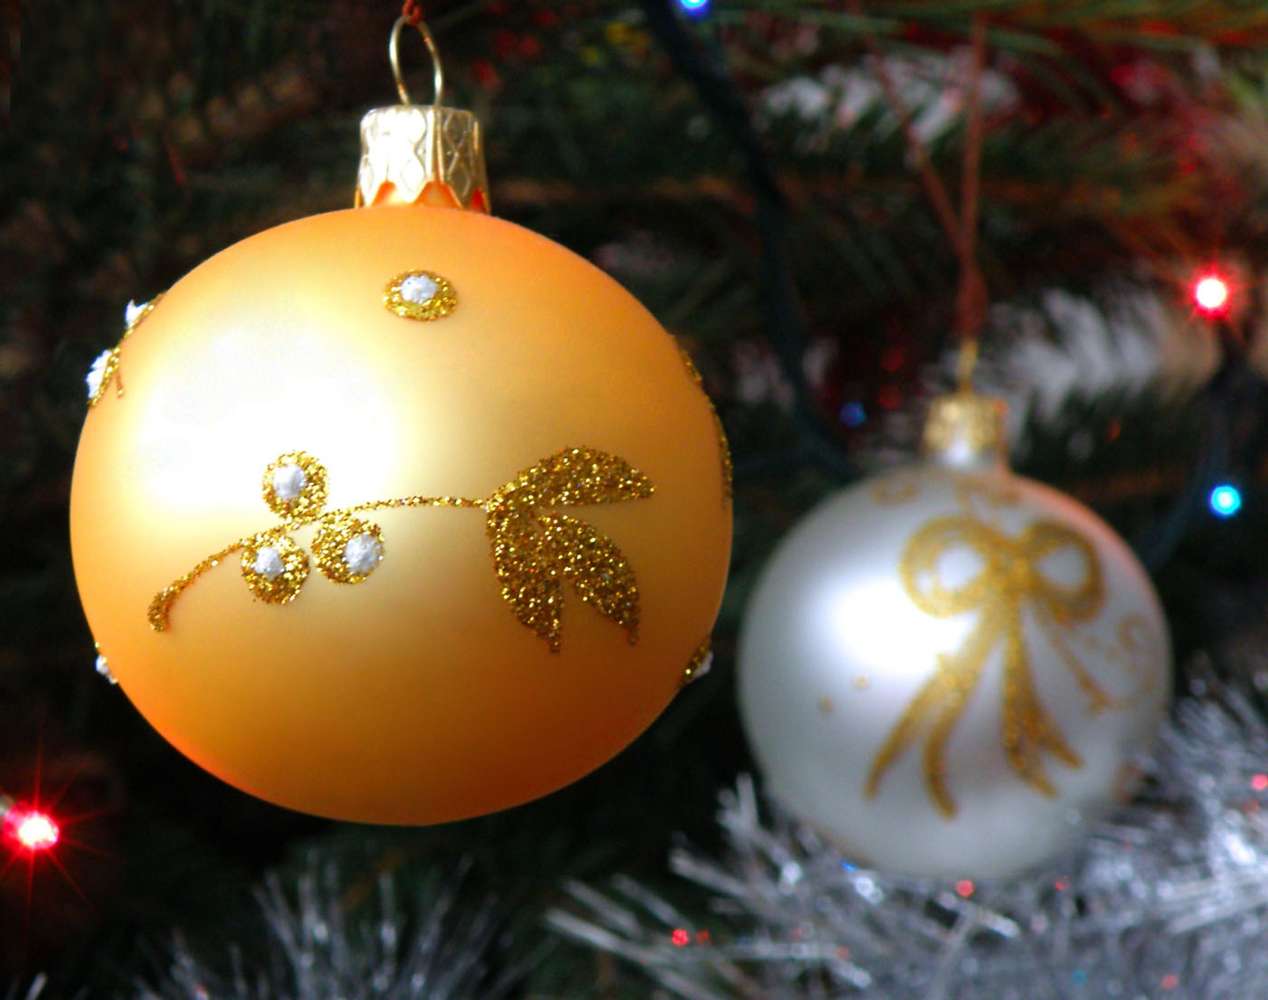 Gold And Silver Christmas Ornaments Background Image, Wallpaper or ...